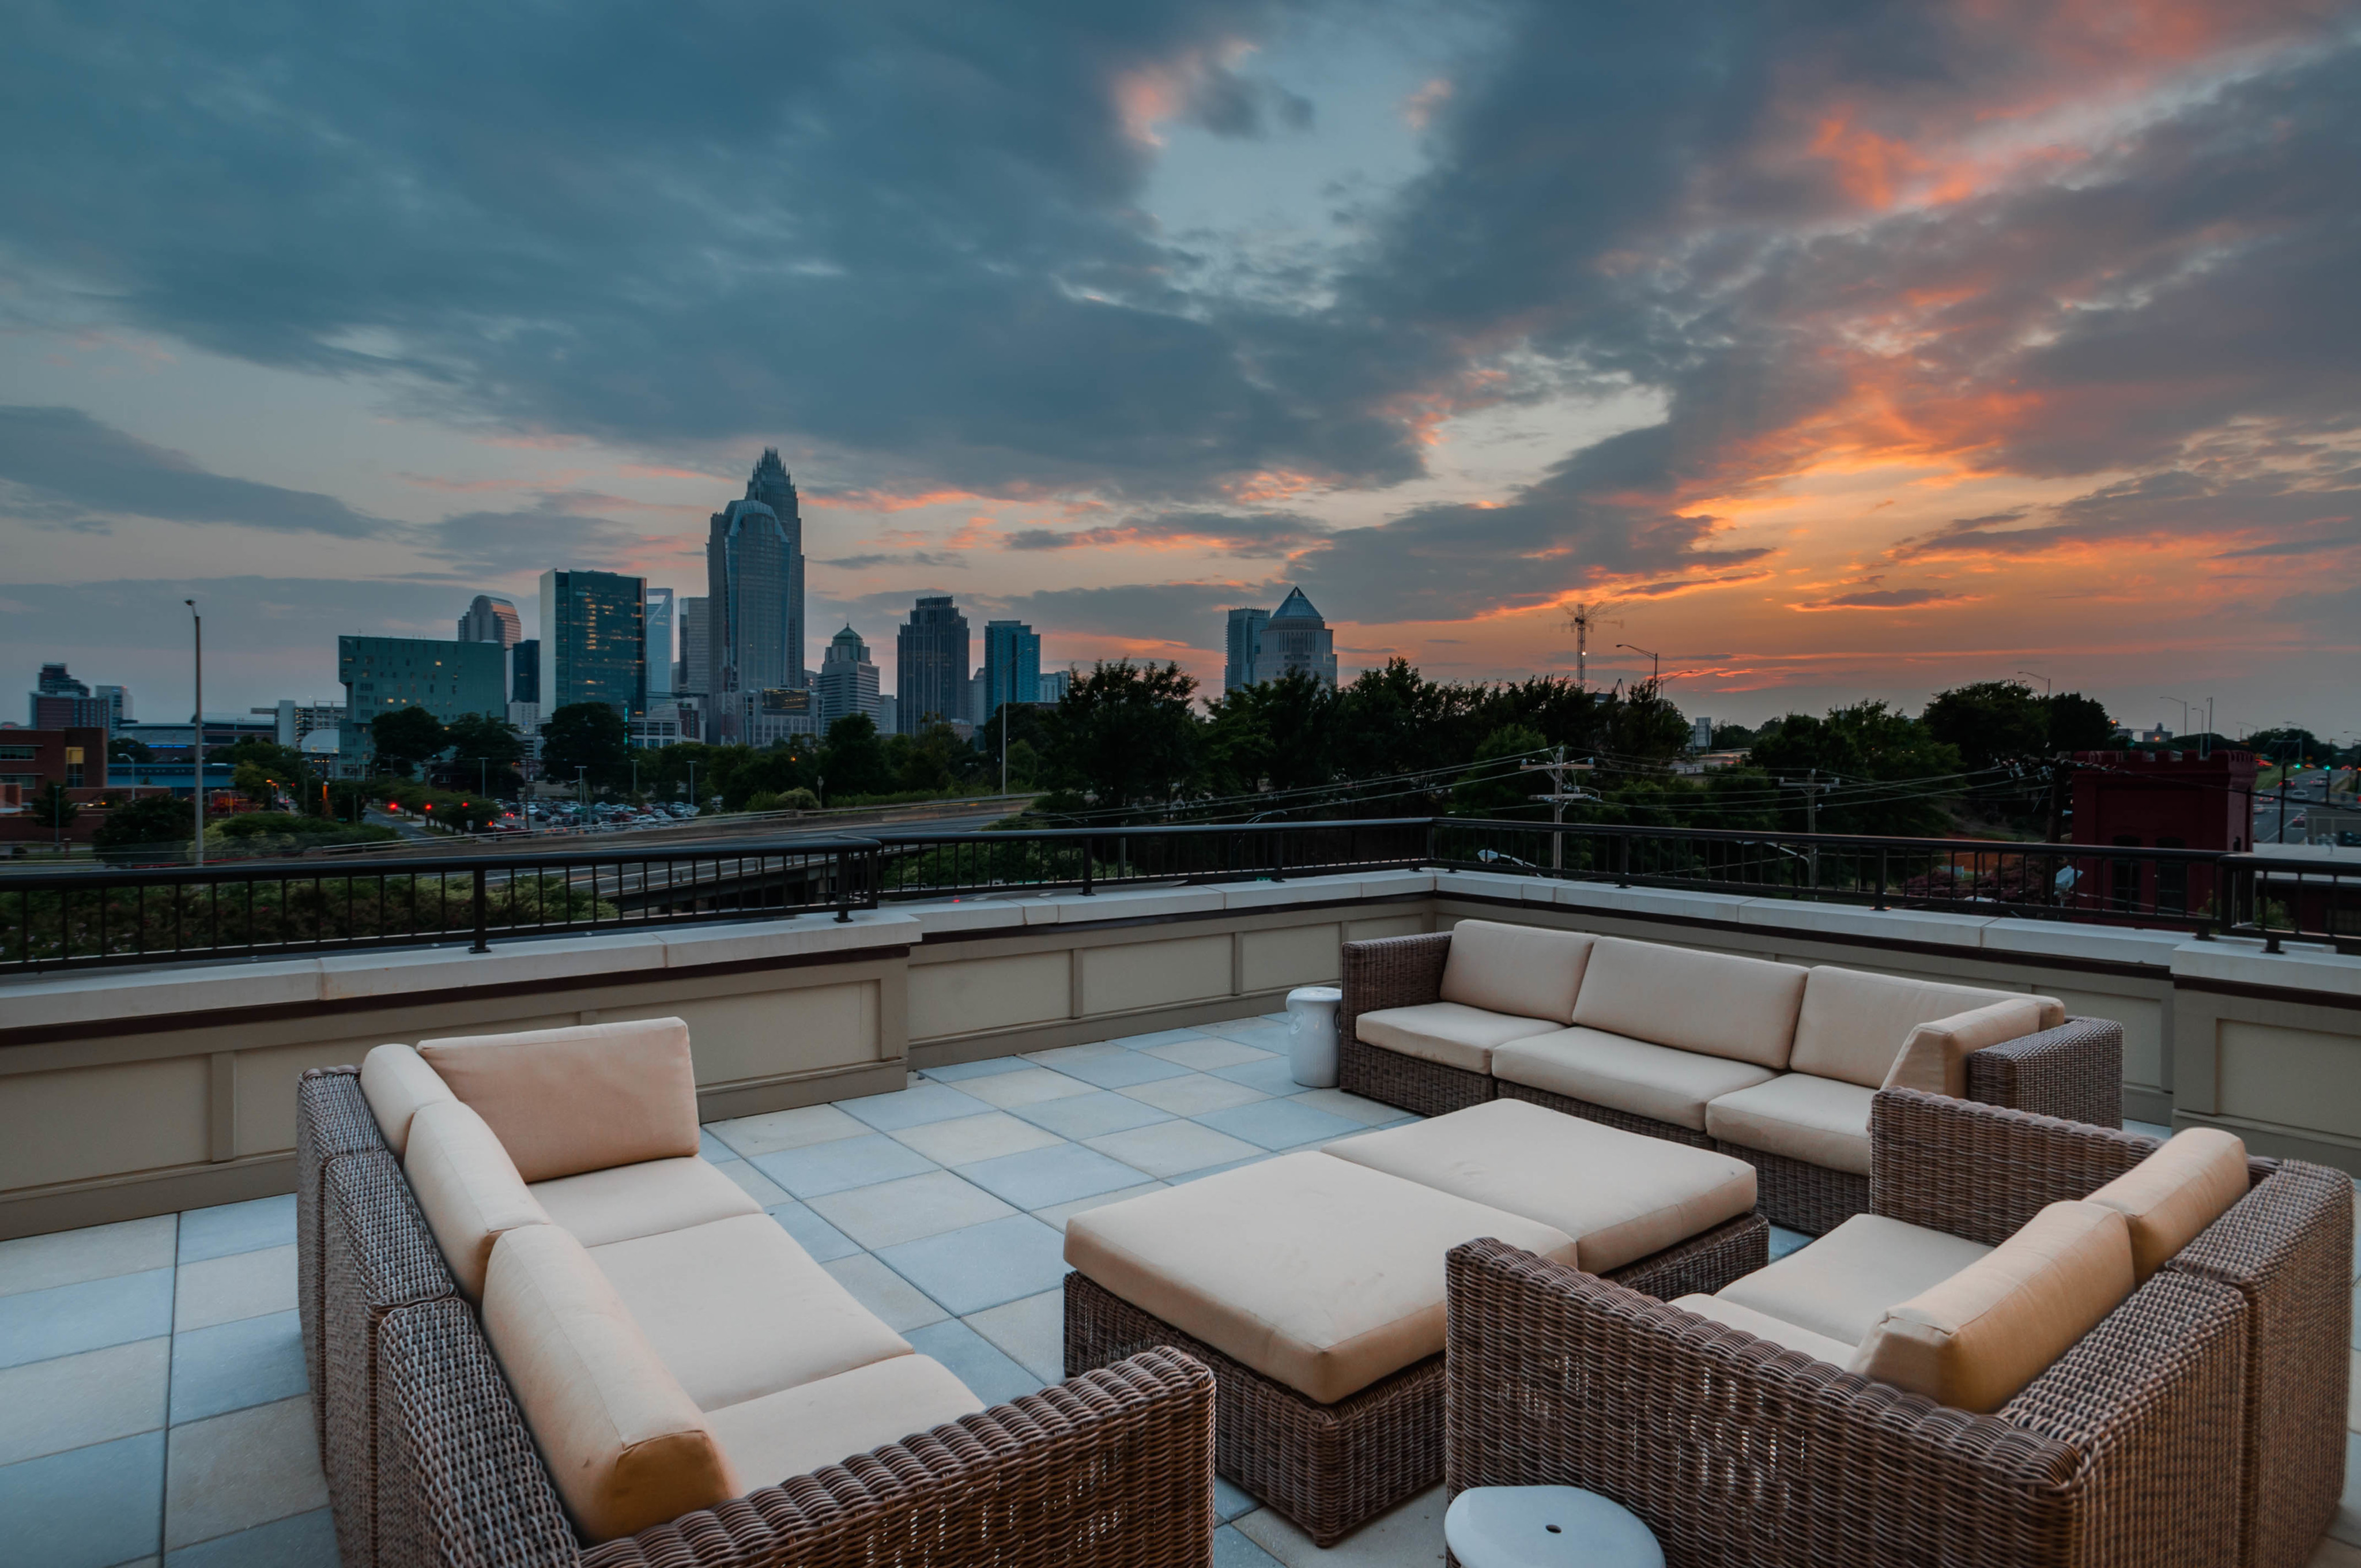 View of Rooftop Lounge, Showing Outdoor Couches, Sky at Sunset, and Views of Uptown Charlotte at Alpha Mill Apartments